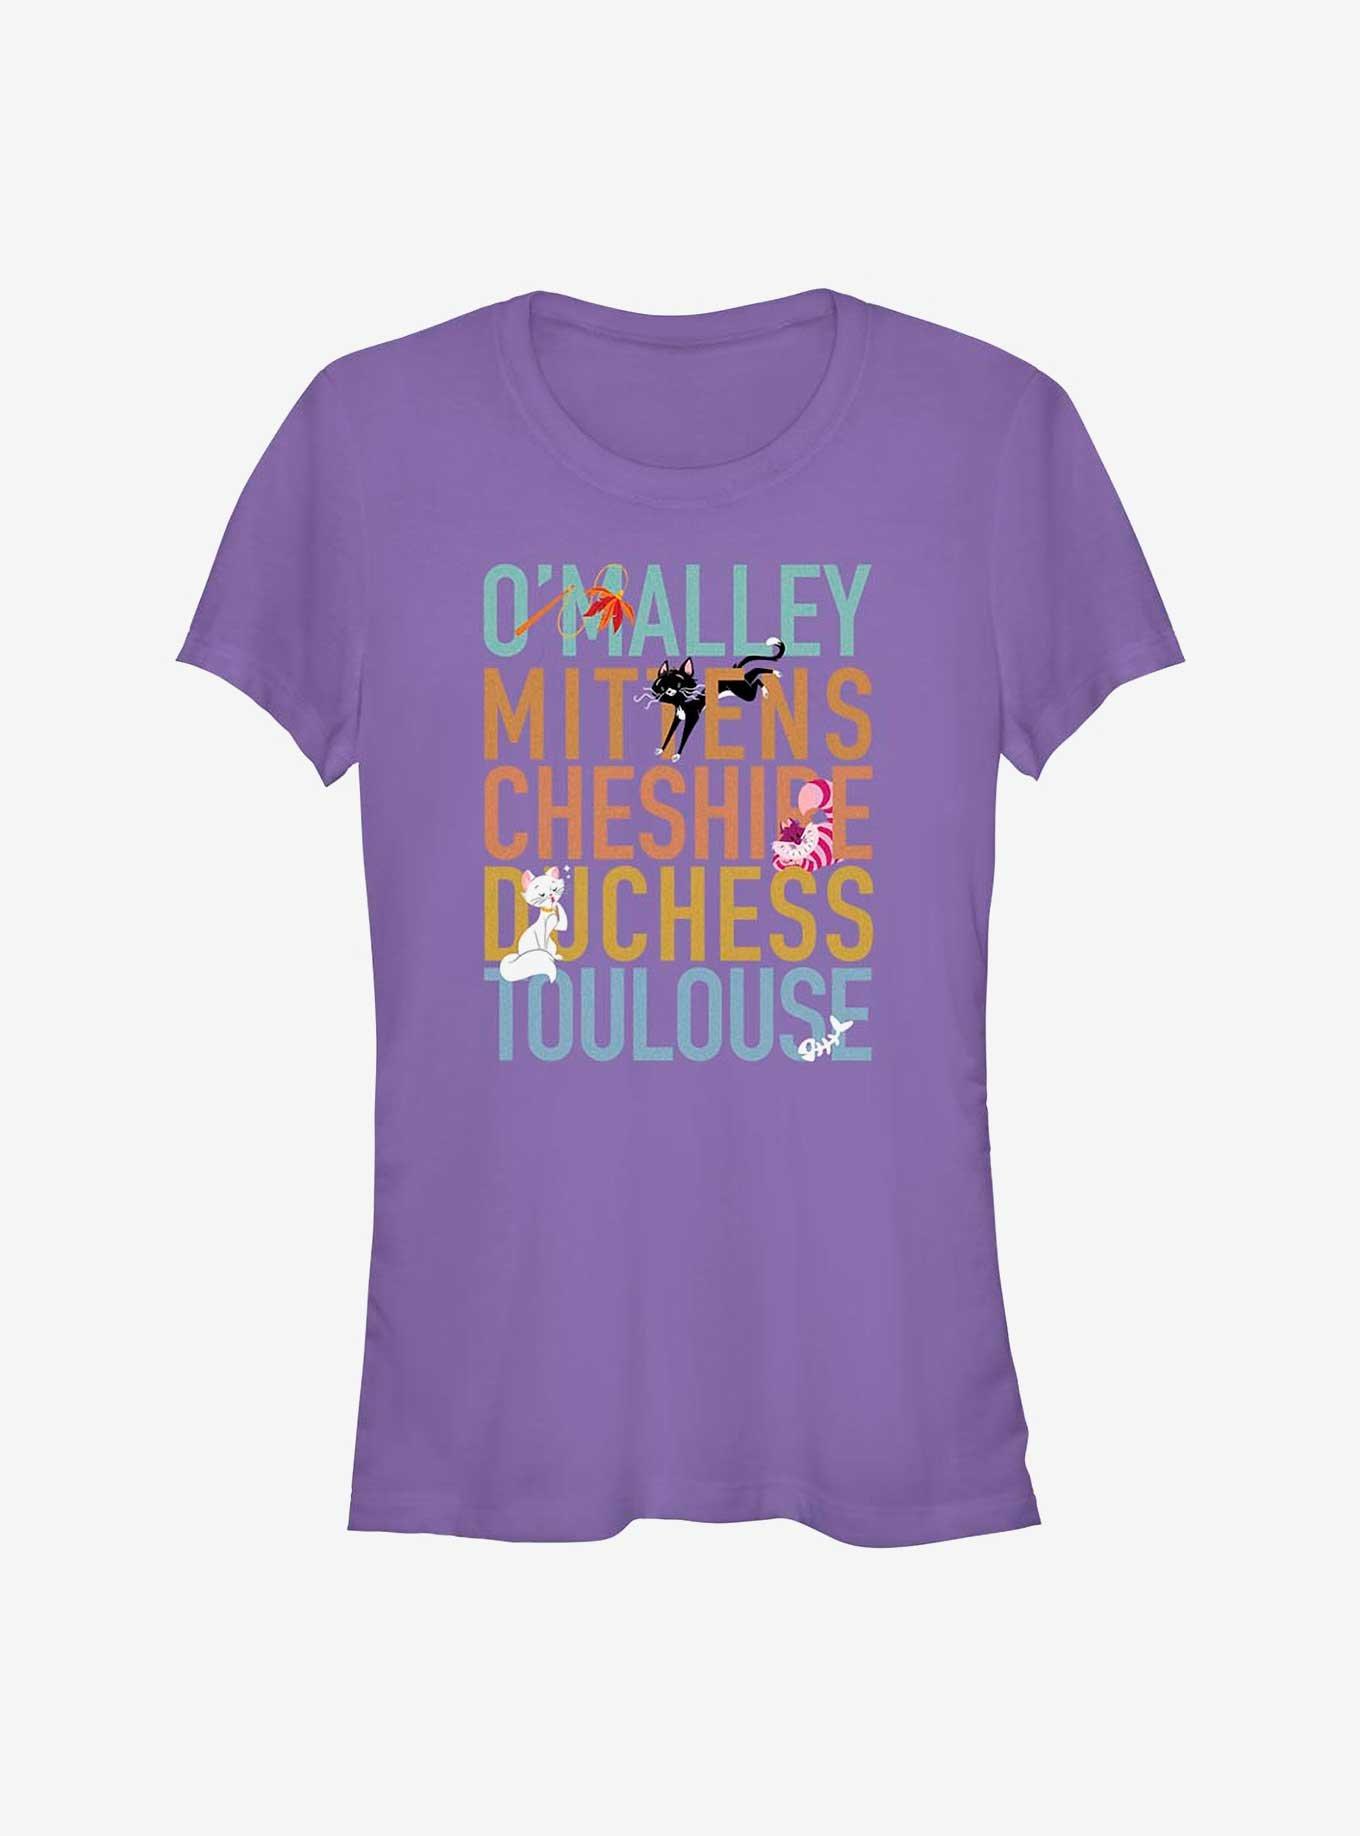 Disney Channel O'Malley, Mittens, Cheshire, Duchess, Toulouse Girls T-Shirt, PURPLE, hi-res